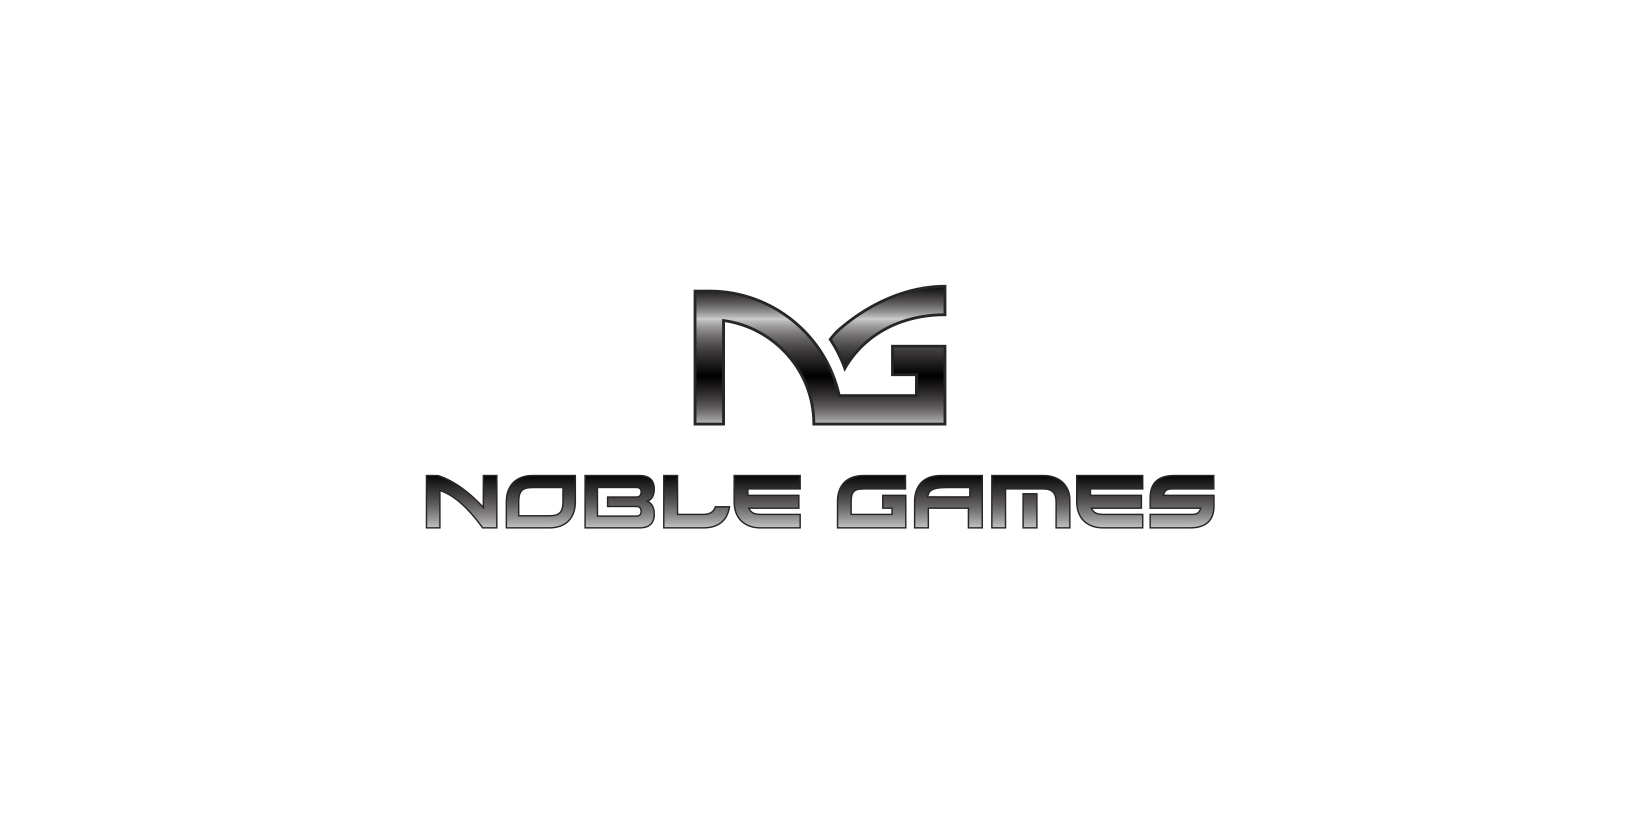 Nobel Games Brand Identity and Website Development by Think Creative Agency8